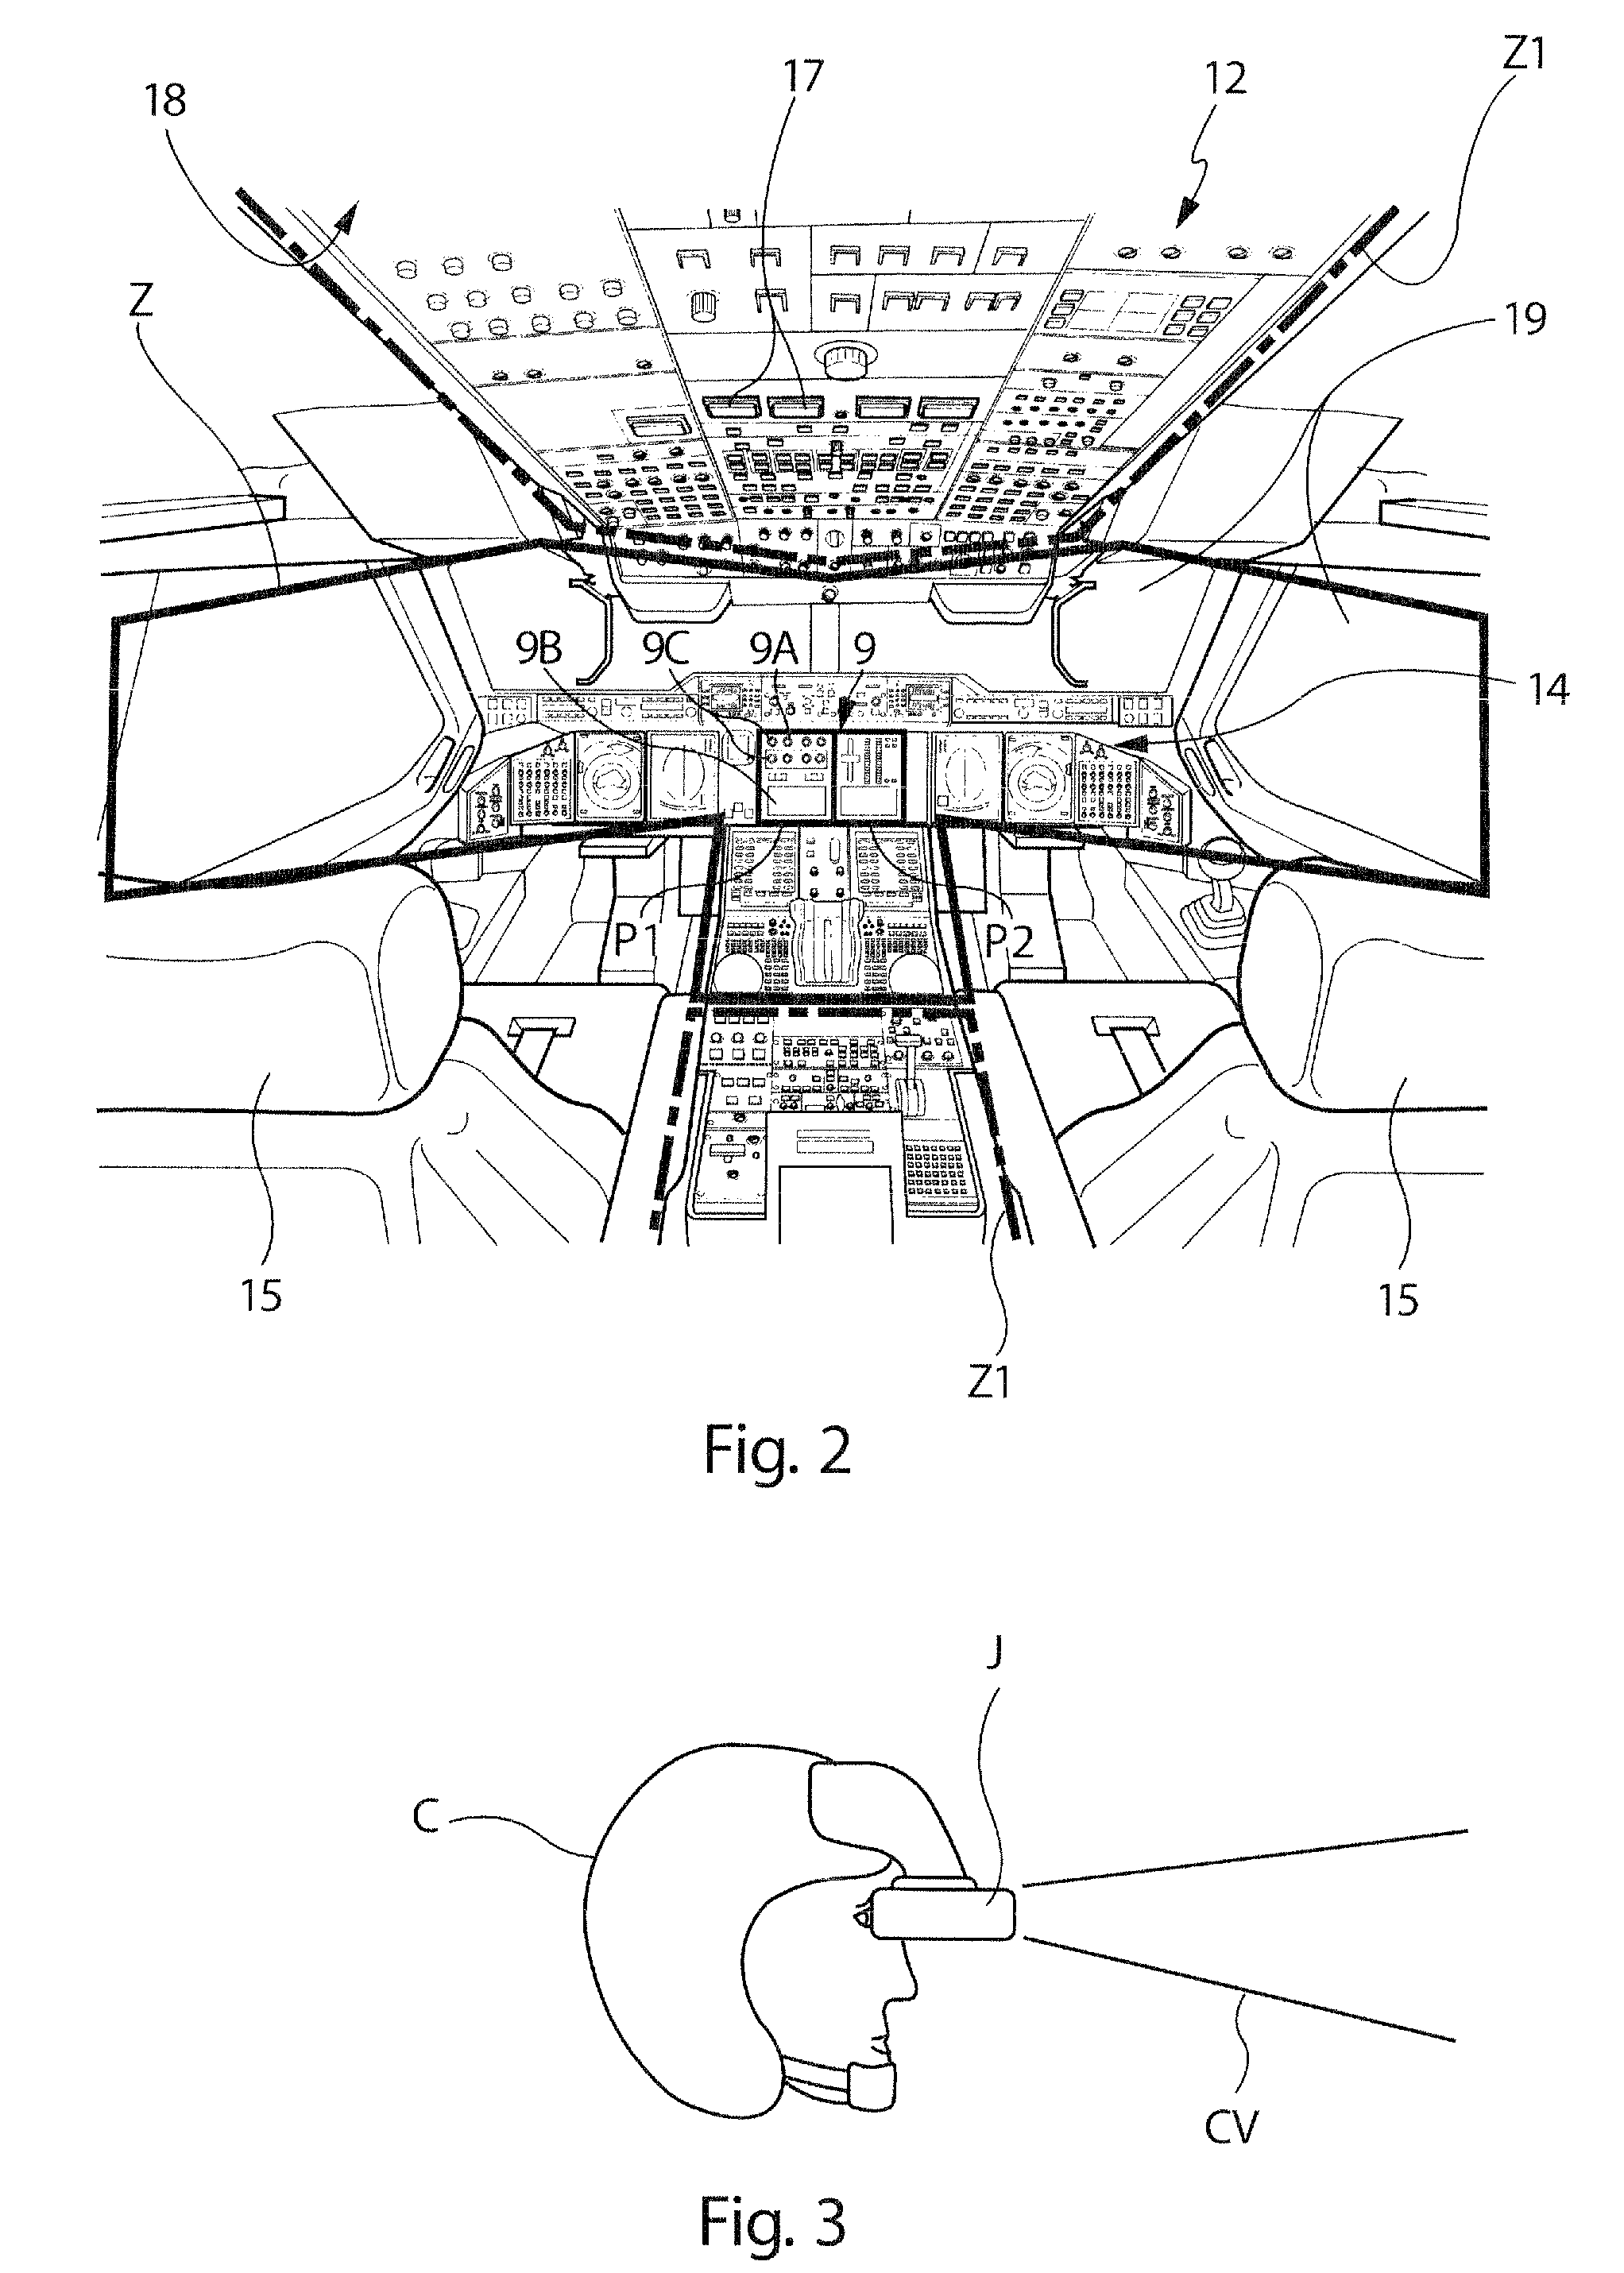 Installation for detecting and displaying the failures of the functional systems of an aircraft